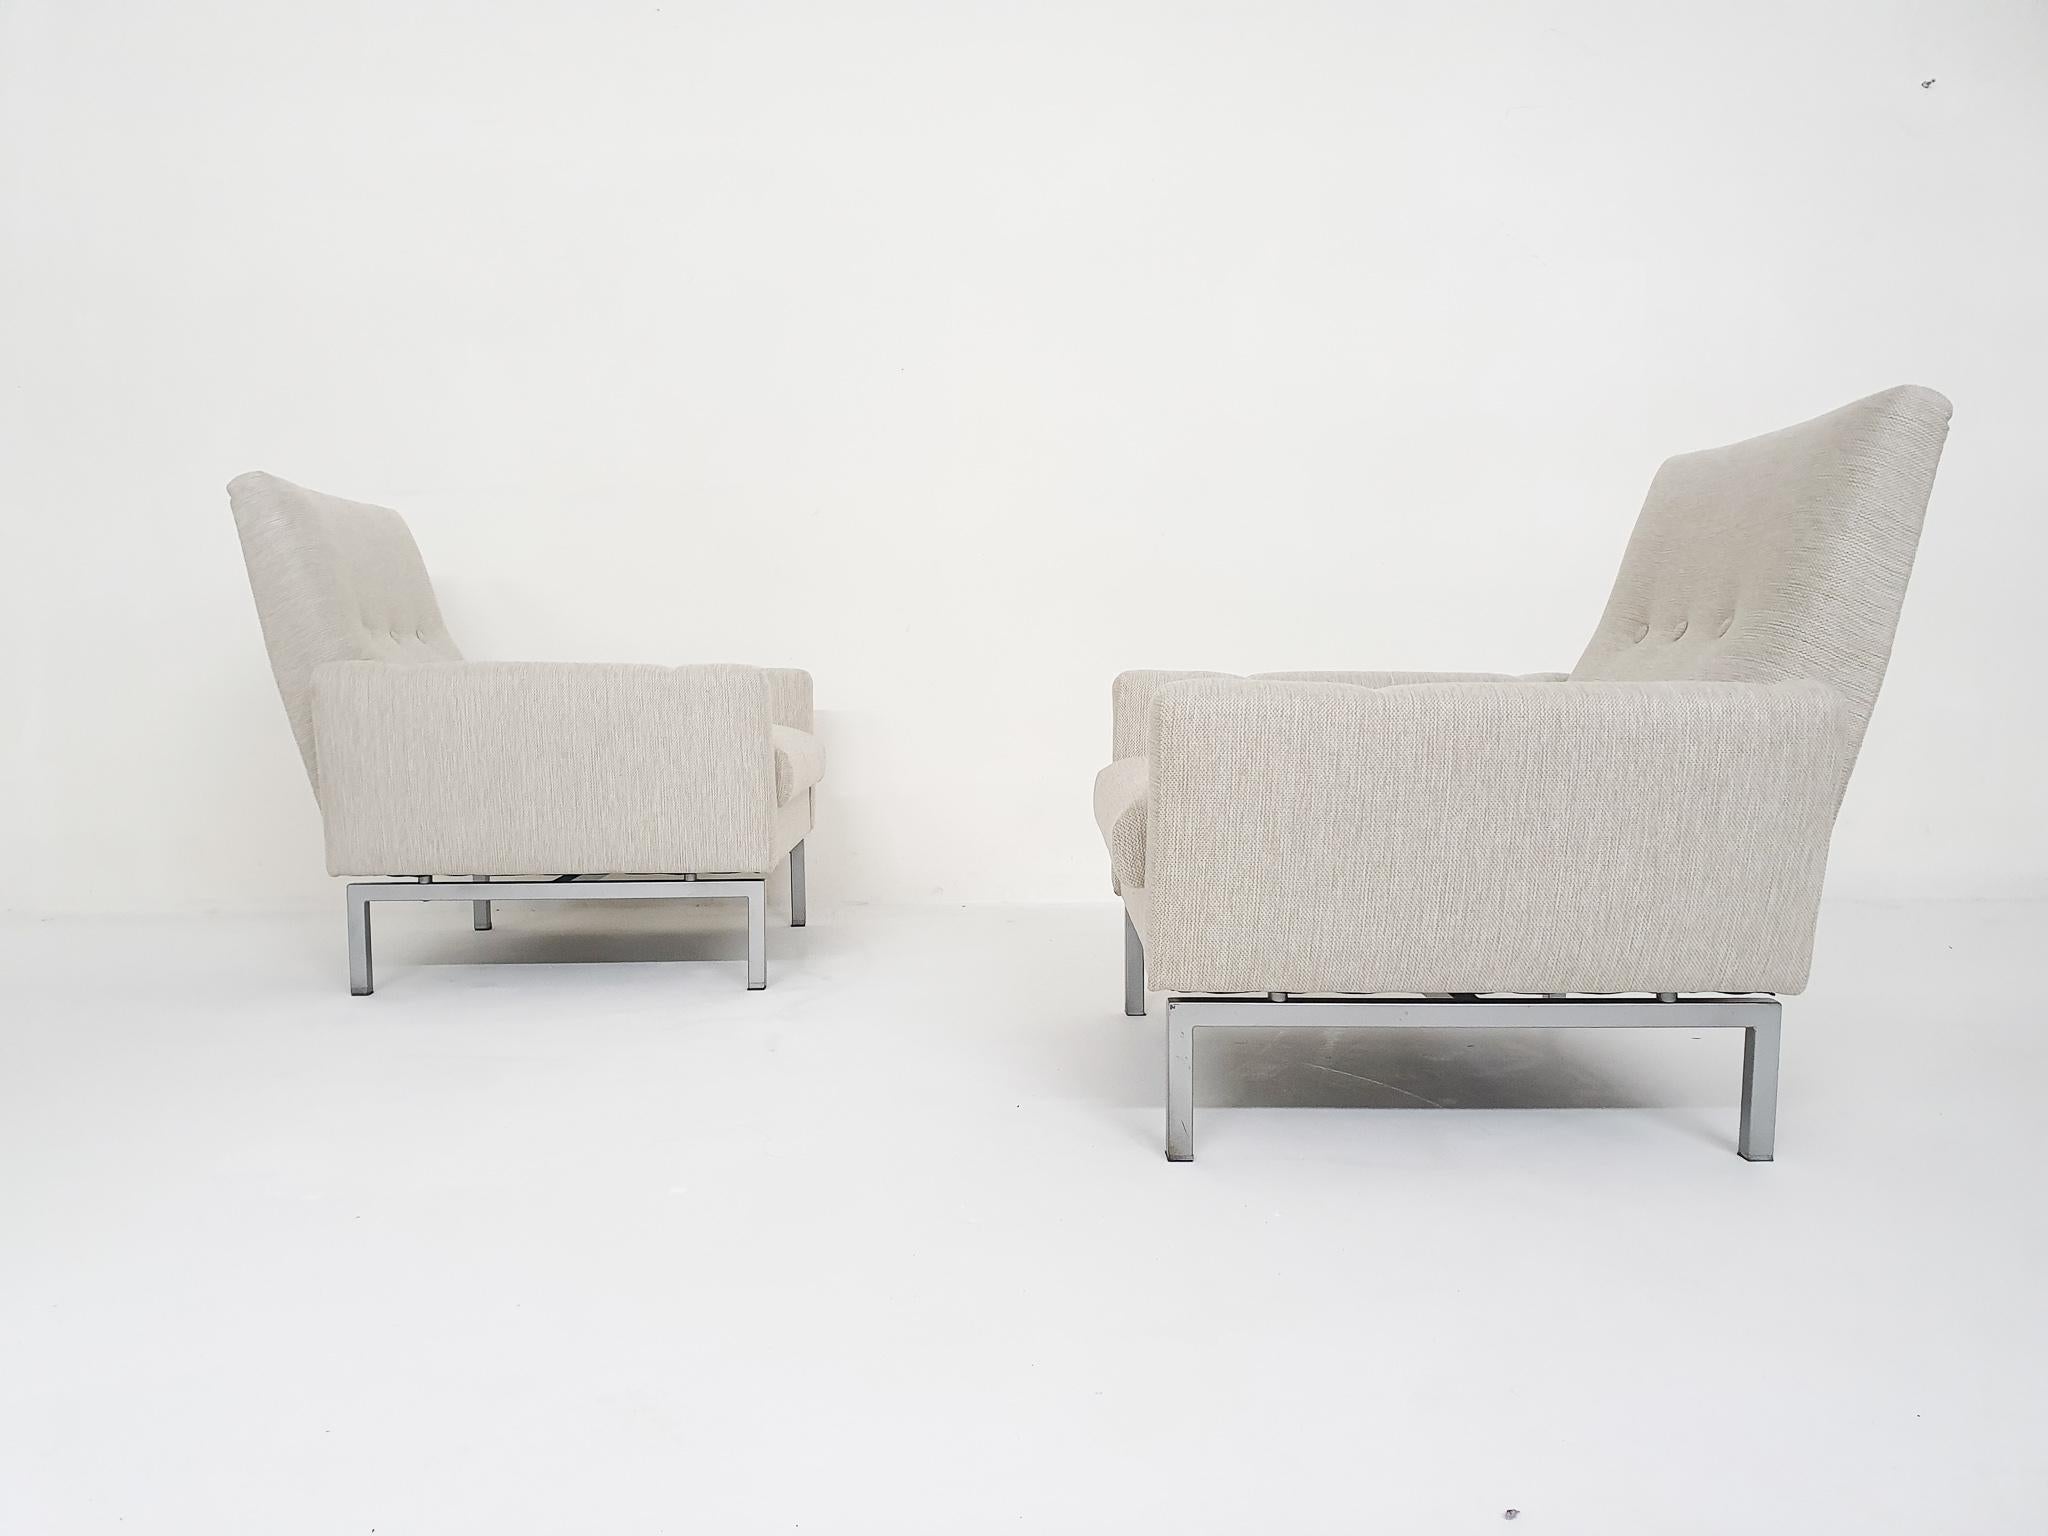 Metal Set of Two Mid-Century Modern Lounge Chairs Attr. Artifort, The Netherlands 1950 For Sale